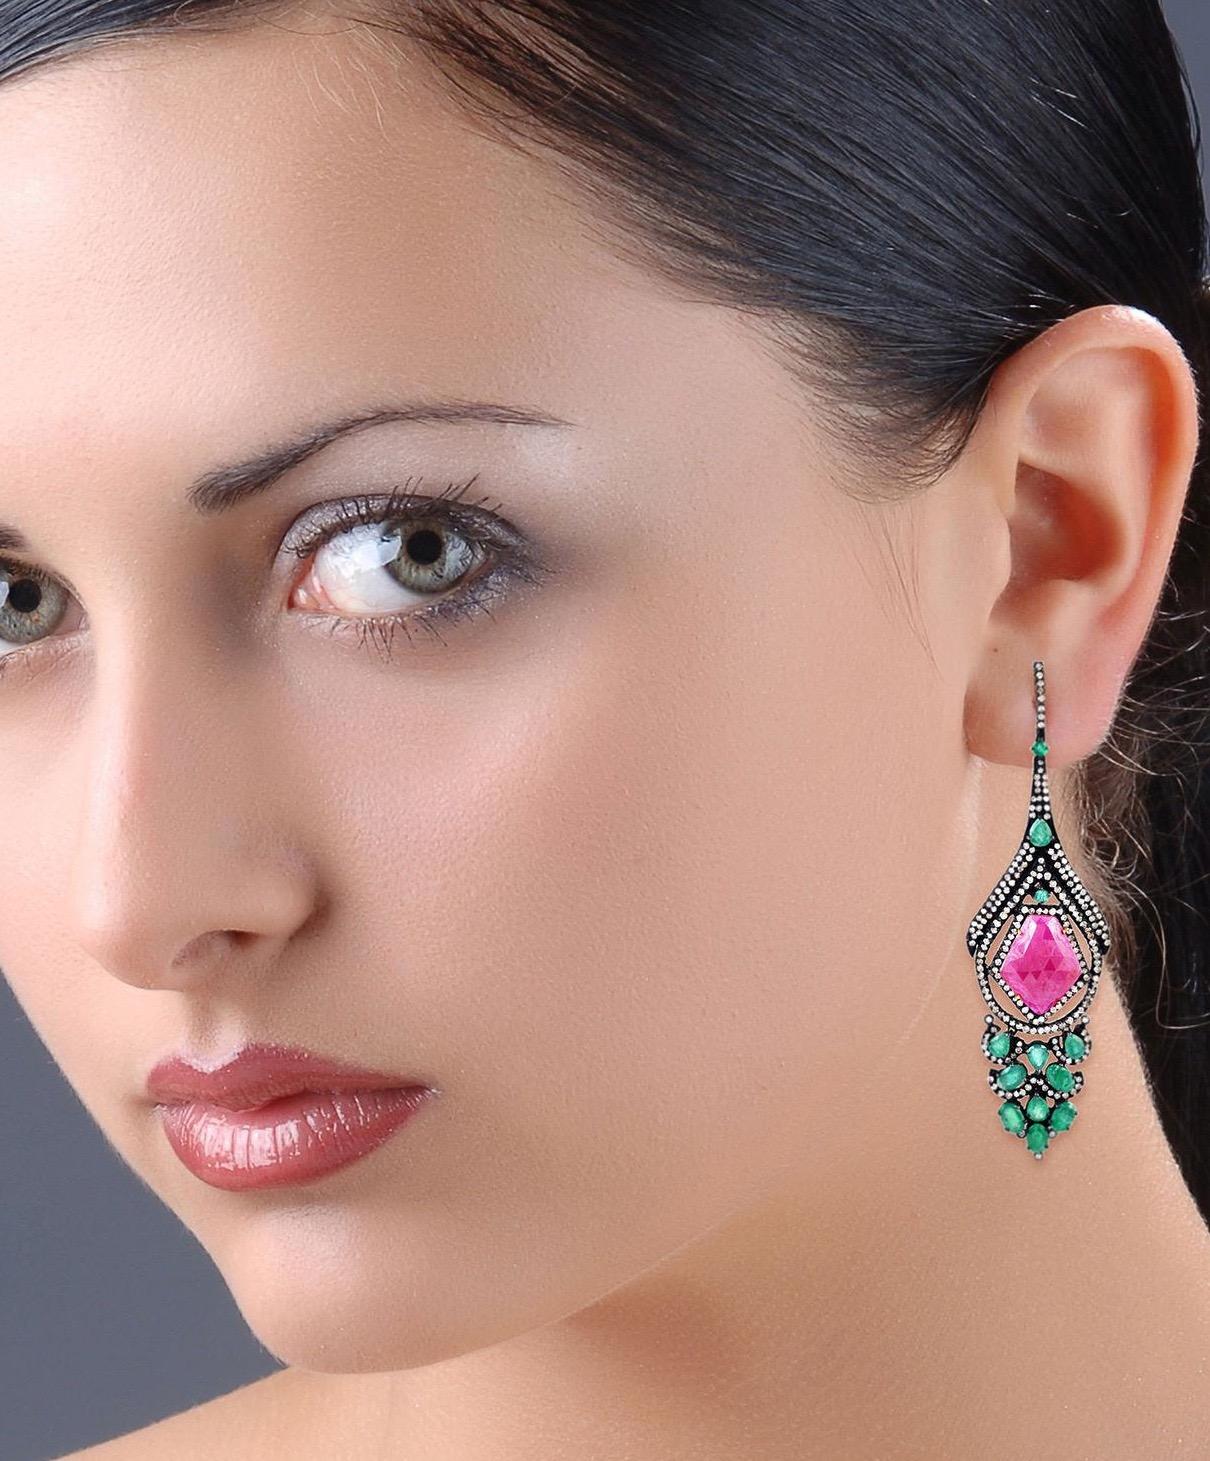 Handcrafted from 14-karat gold and sterling silver, these beautiful earrings are set with 19.3 carats ruby, 7.74 carats emerald and 4.5 carats of glimmering diamonds with blackened finish.

FOLLOW  MEGHNA JEWELS storefront to view the latest